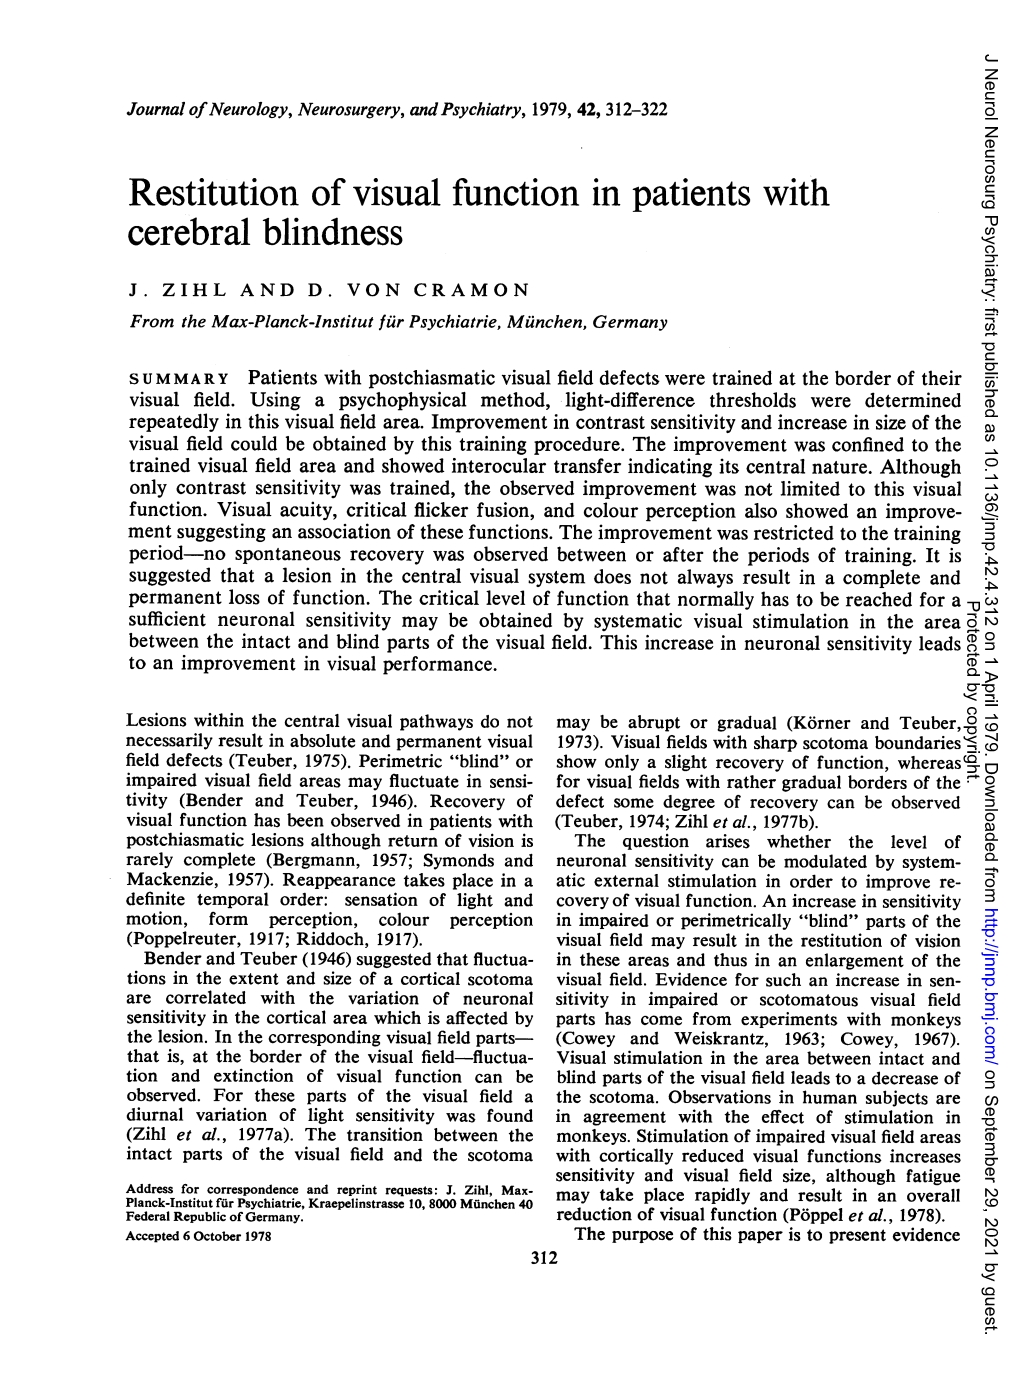 Restitution of Visual Function in Patients with Cerebral Blindness